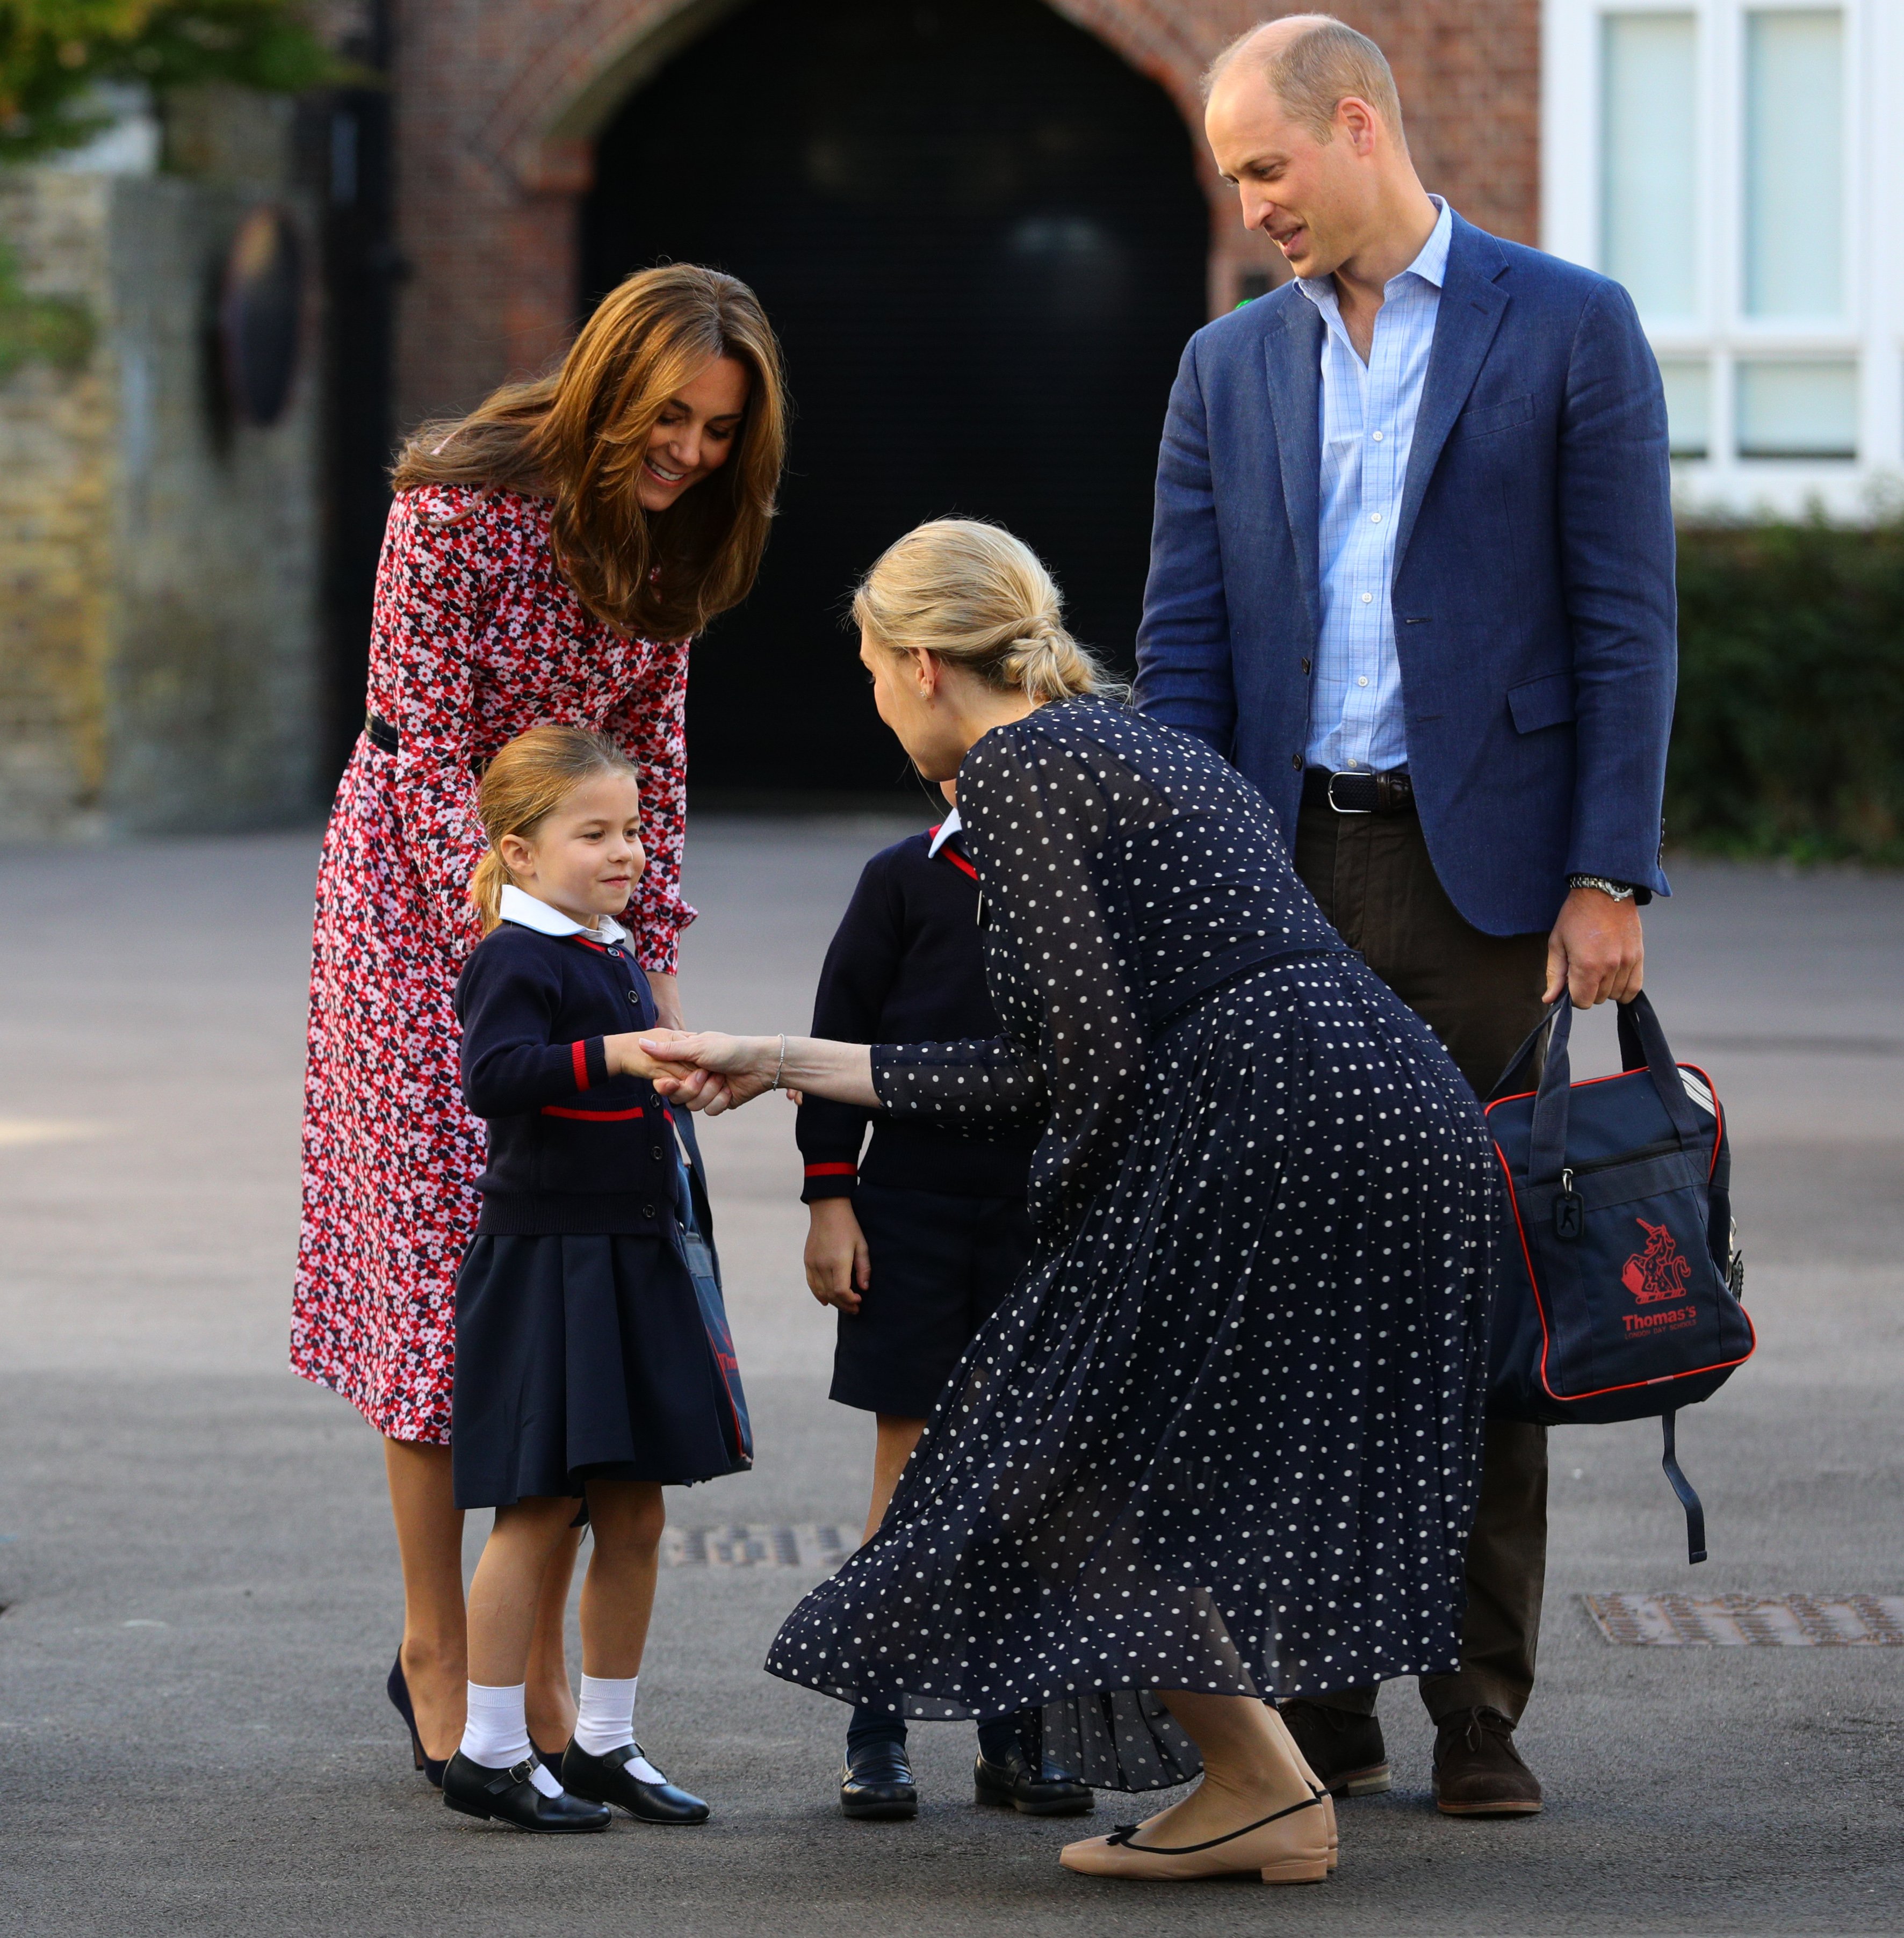 Helen Haslem greeting Princess Charlotte as she arrives for her first day of school, and her parents Kate Middleton and Prince William, at Thomas's Battersea in London on September 5, 2019, in London, England. | Source: Getty Images